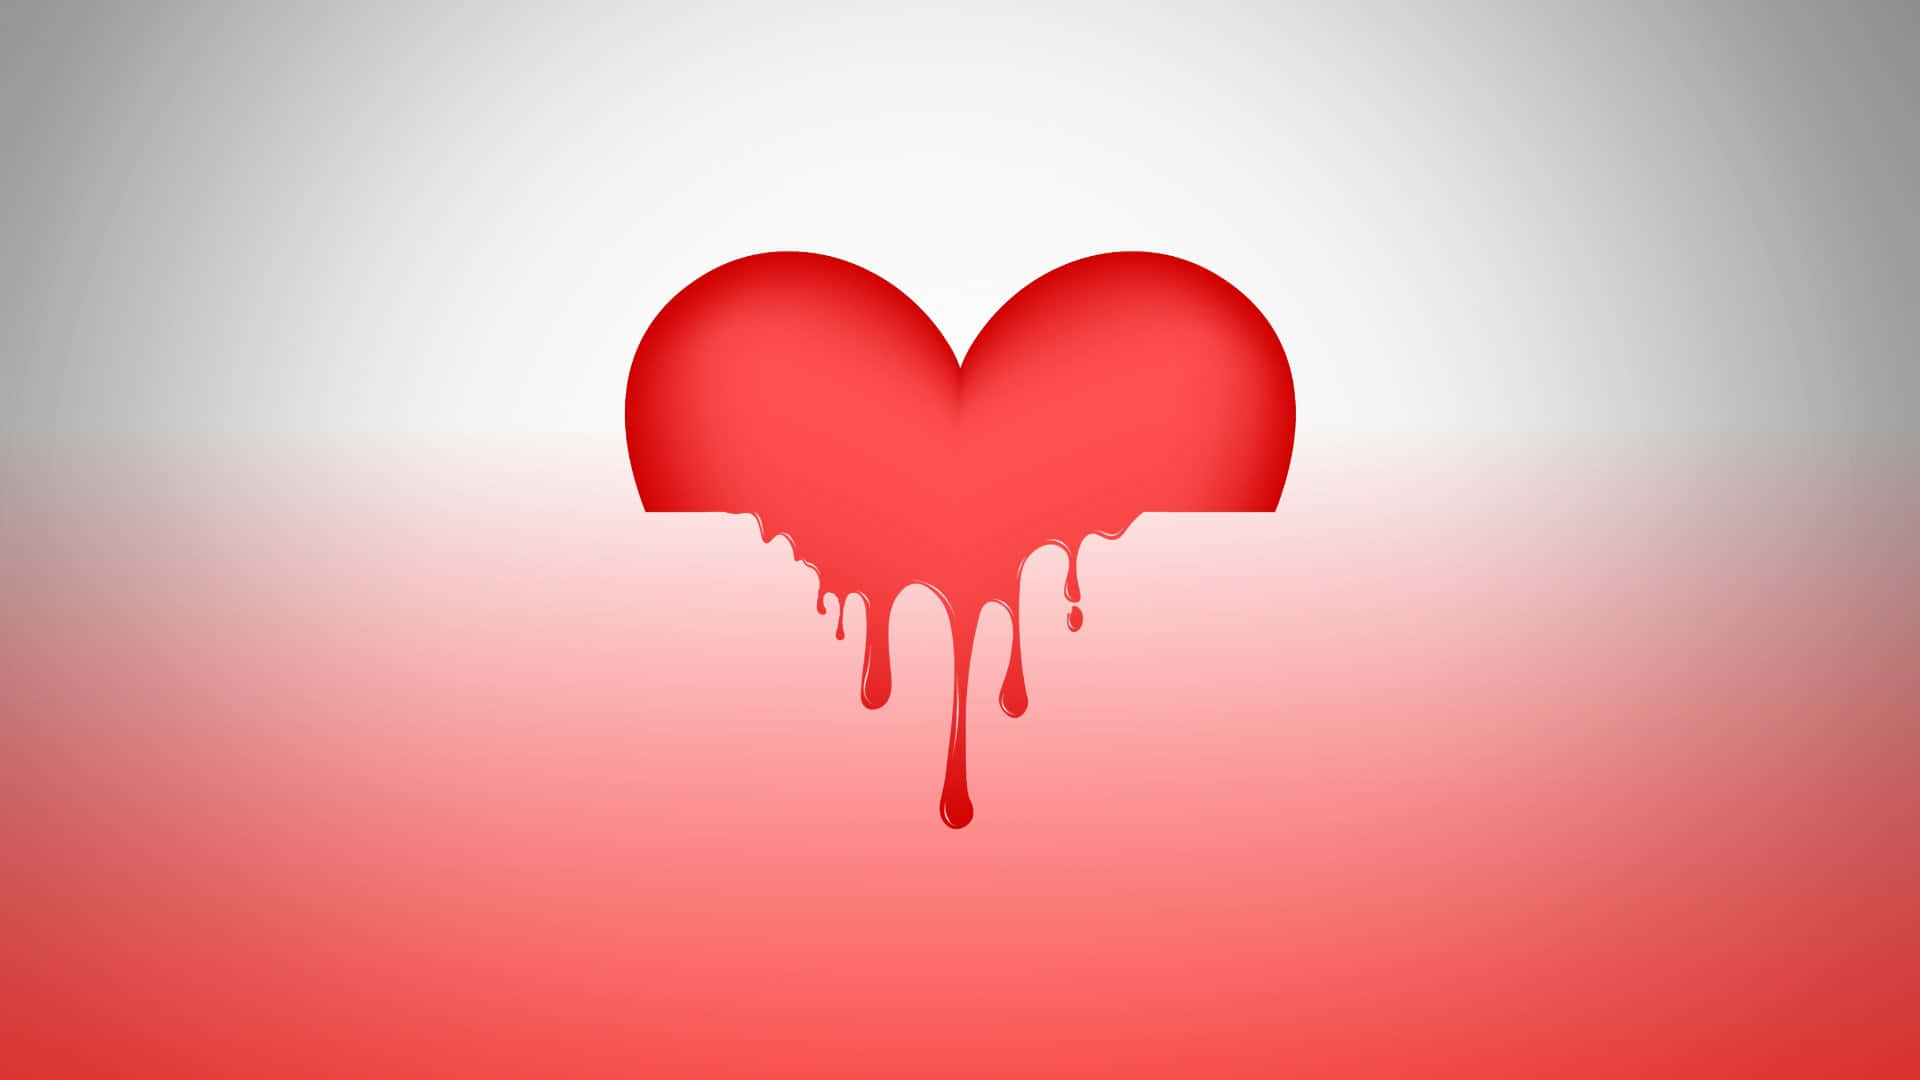 Melting Red Heart Graphic Wallpaper